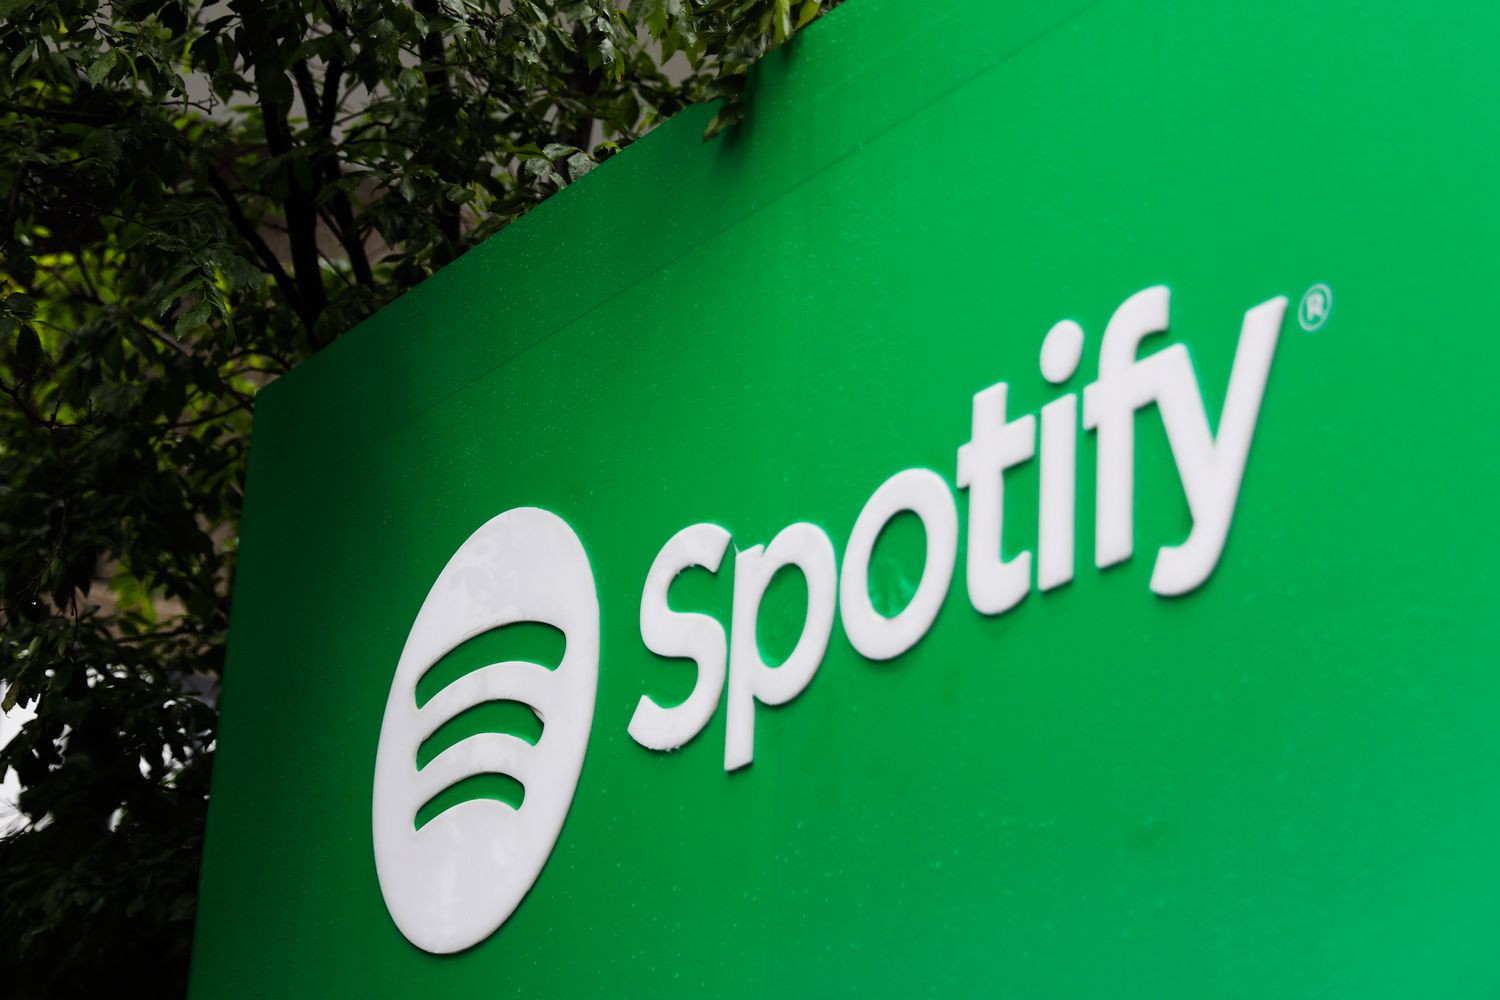 Spotify CEO Daniel Ek Said the Unexpected Layoff of 1,500 Employees May Have “Significantly Challenged” Daily Operations